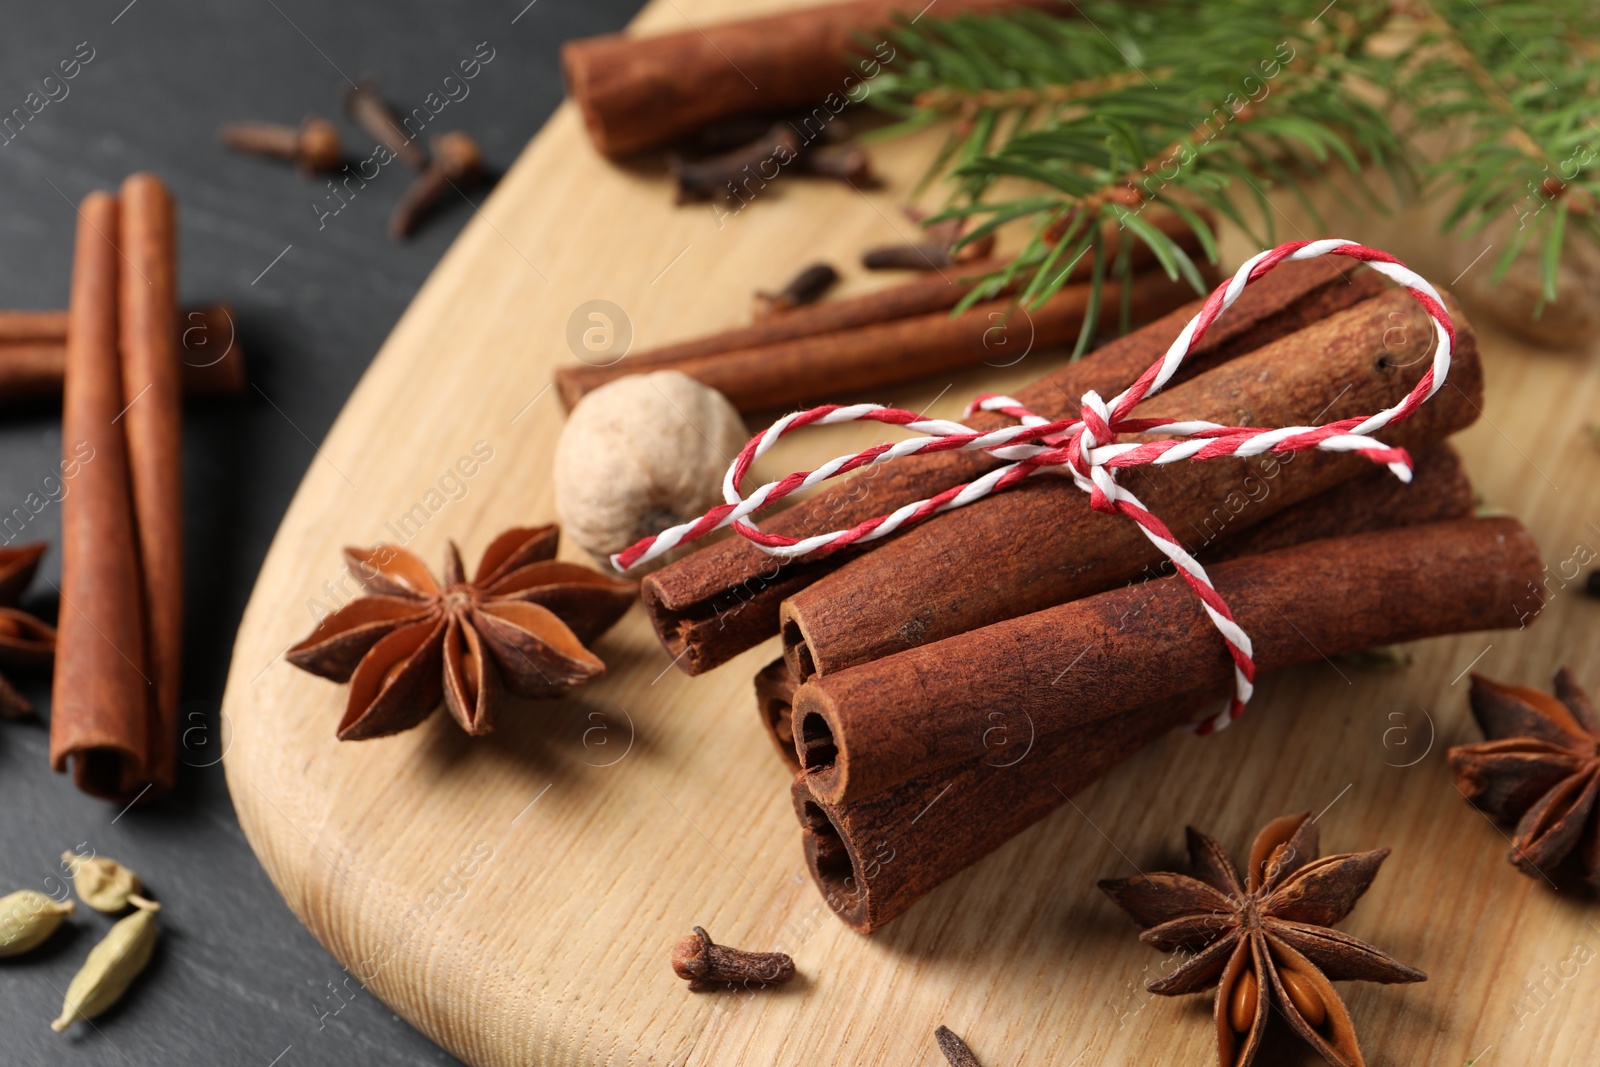 Photo of Cinnamon sticks and other spices on table, closeup